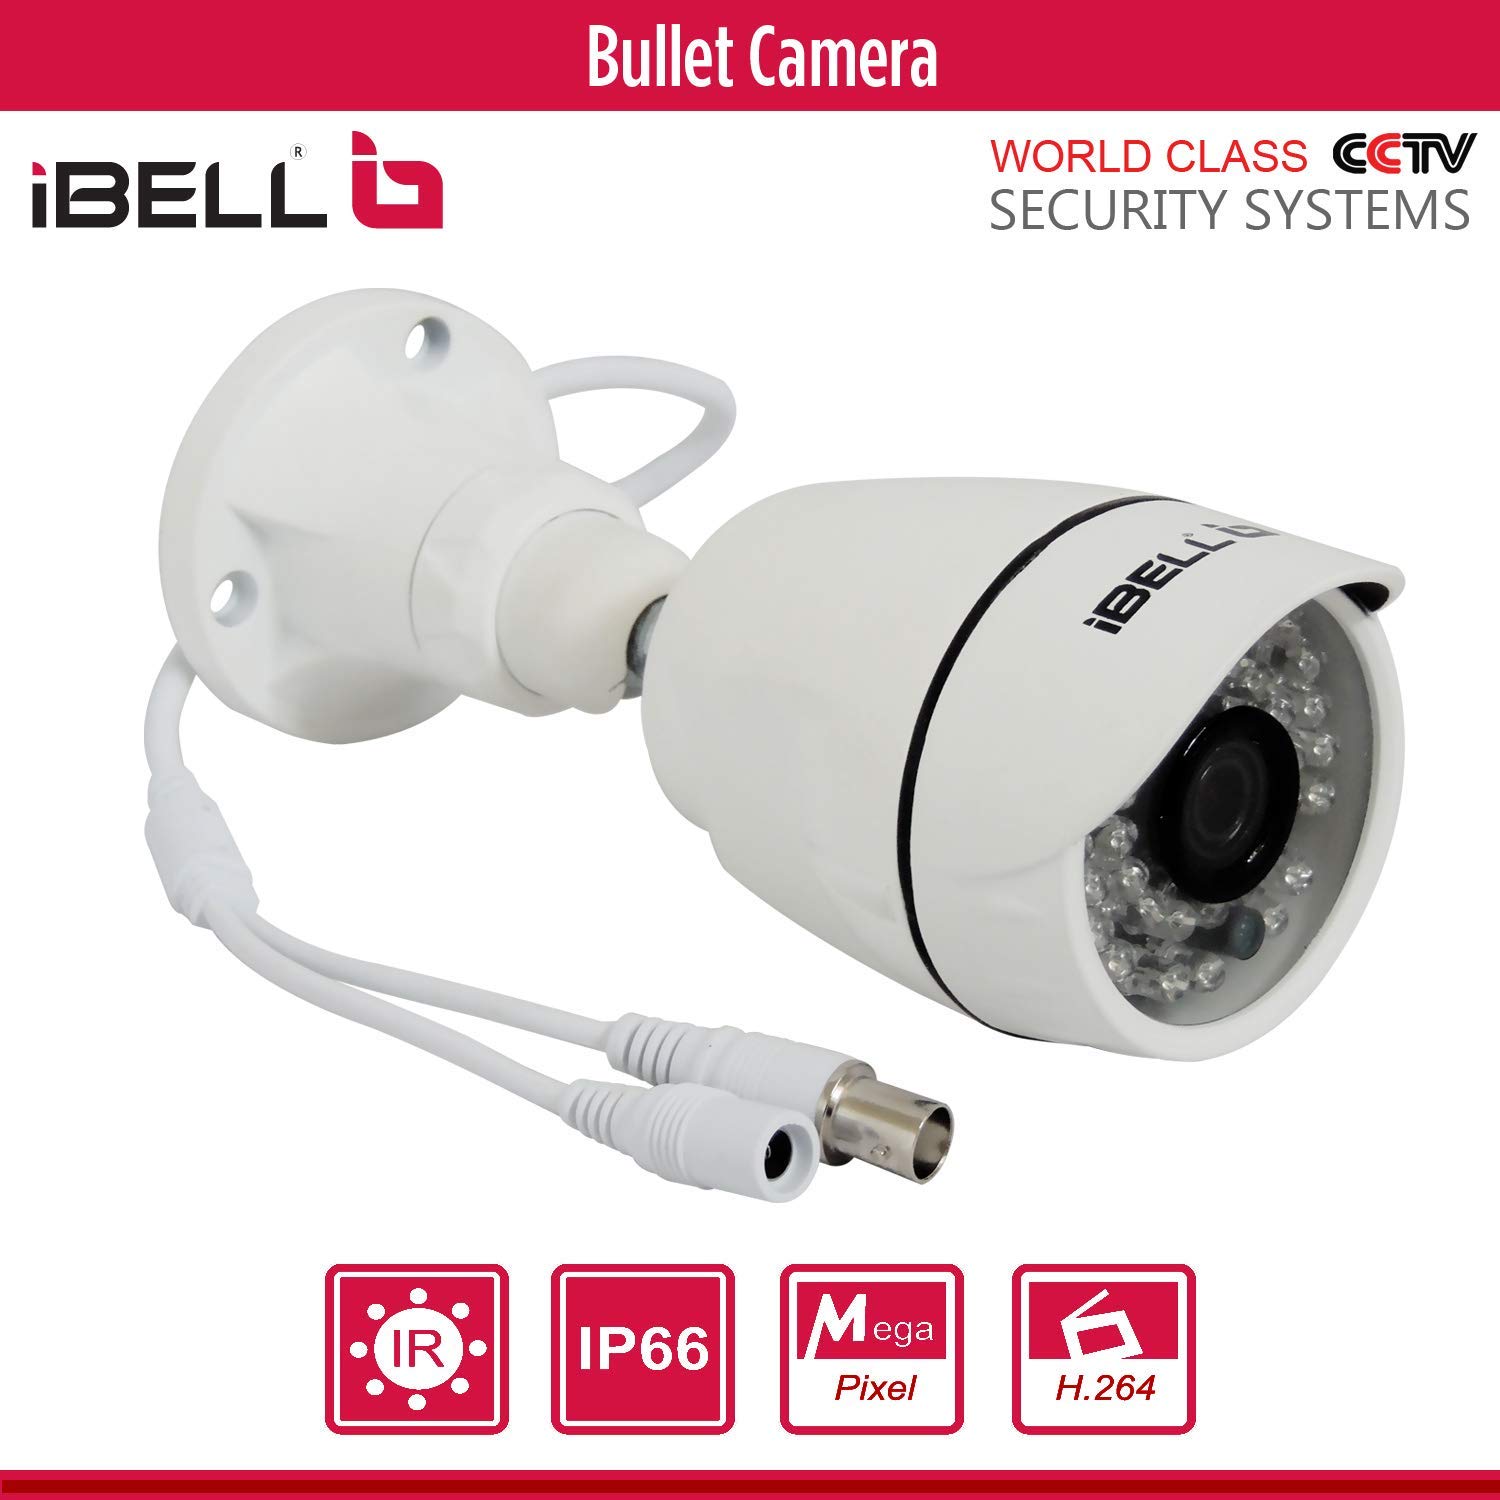 Why You Should not Buy Cheap Security Camera